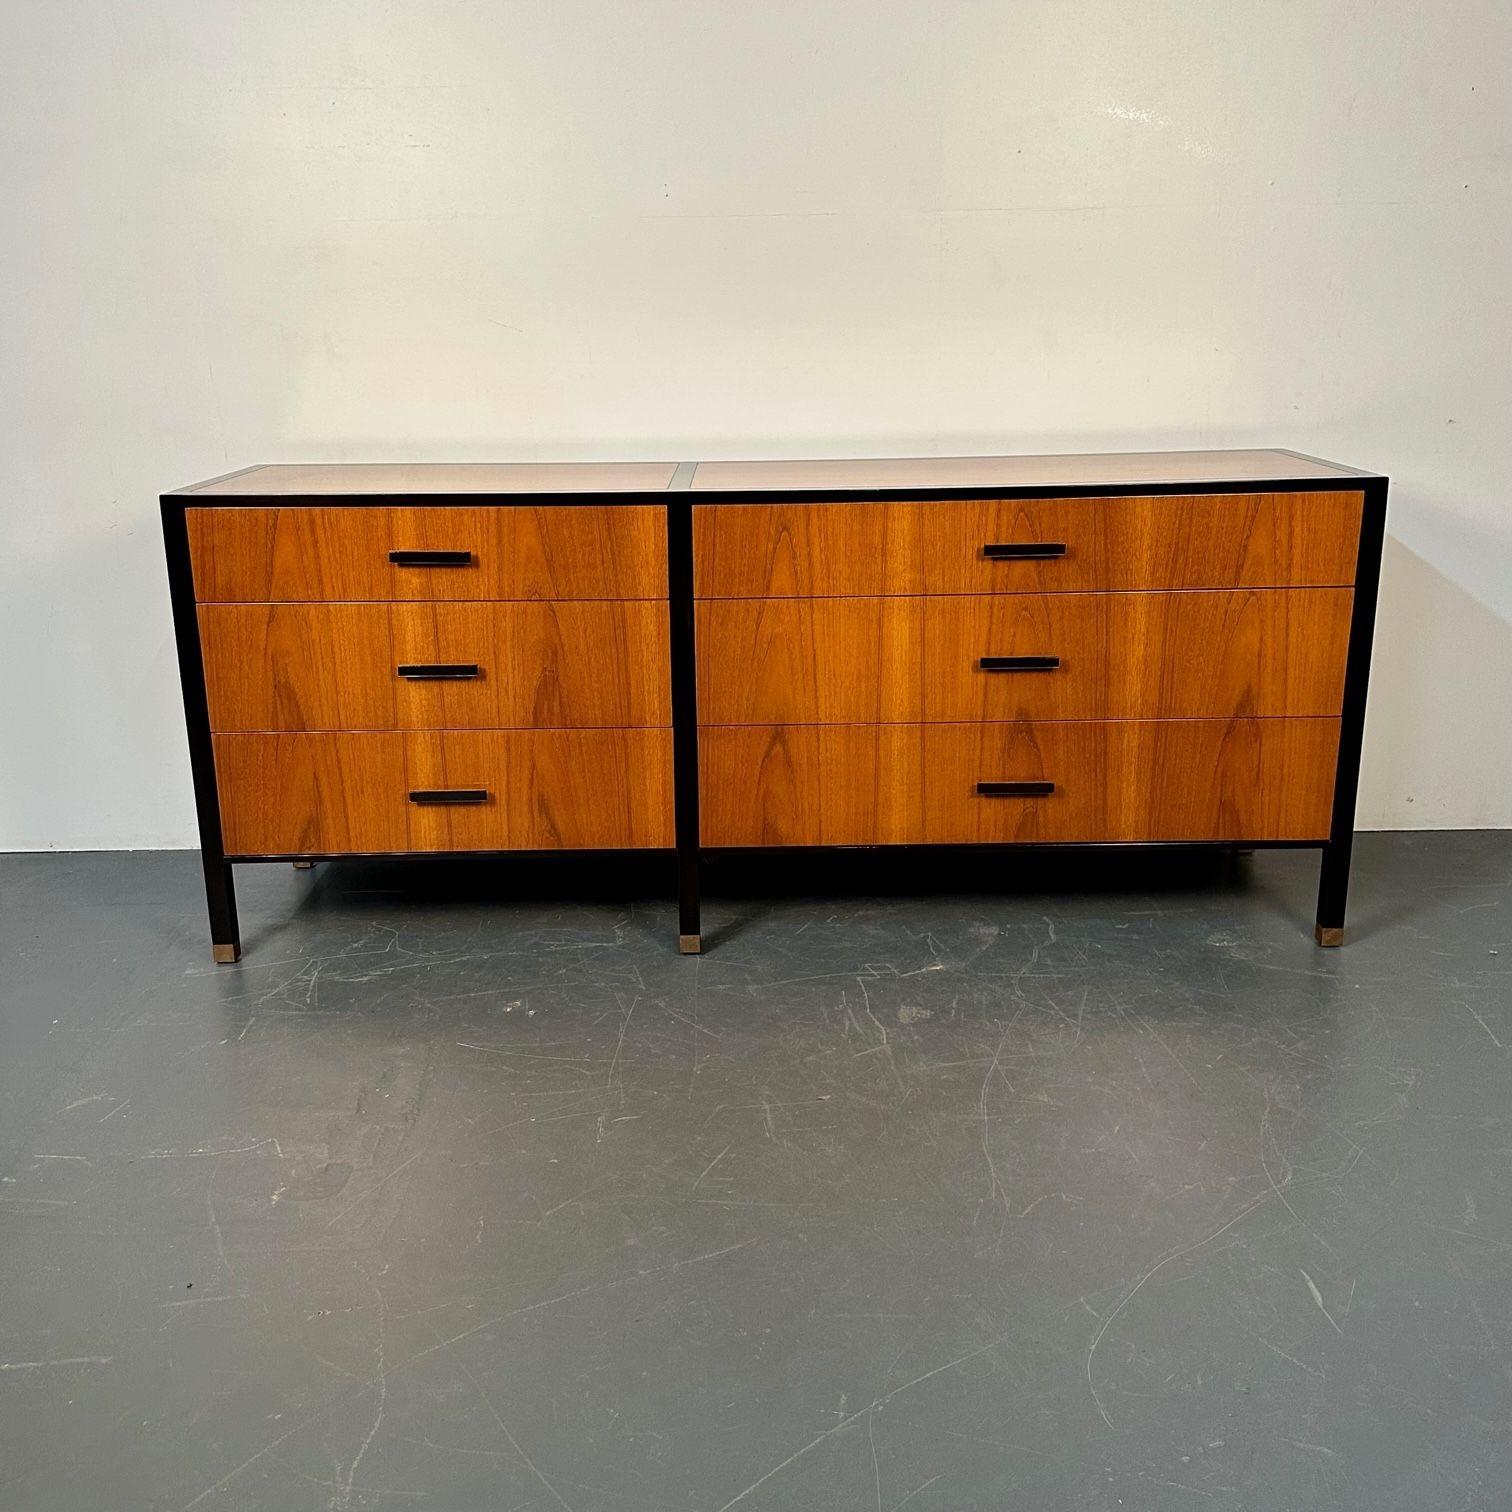 American Mid-Century Modern Rosewood Dresser / Sideboard by Harvey Probber 1960s
Harvey Probber Dresser in Rosewood and Ebonized Mahogany United States c. 1960's. Six drawer dresser in rosewood and ebonized mahogany with brass feet and brass and